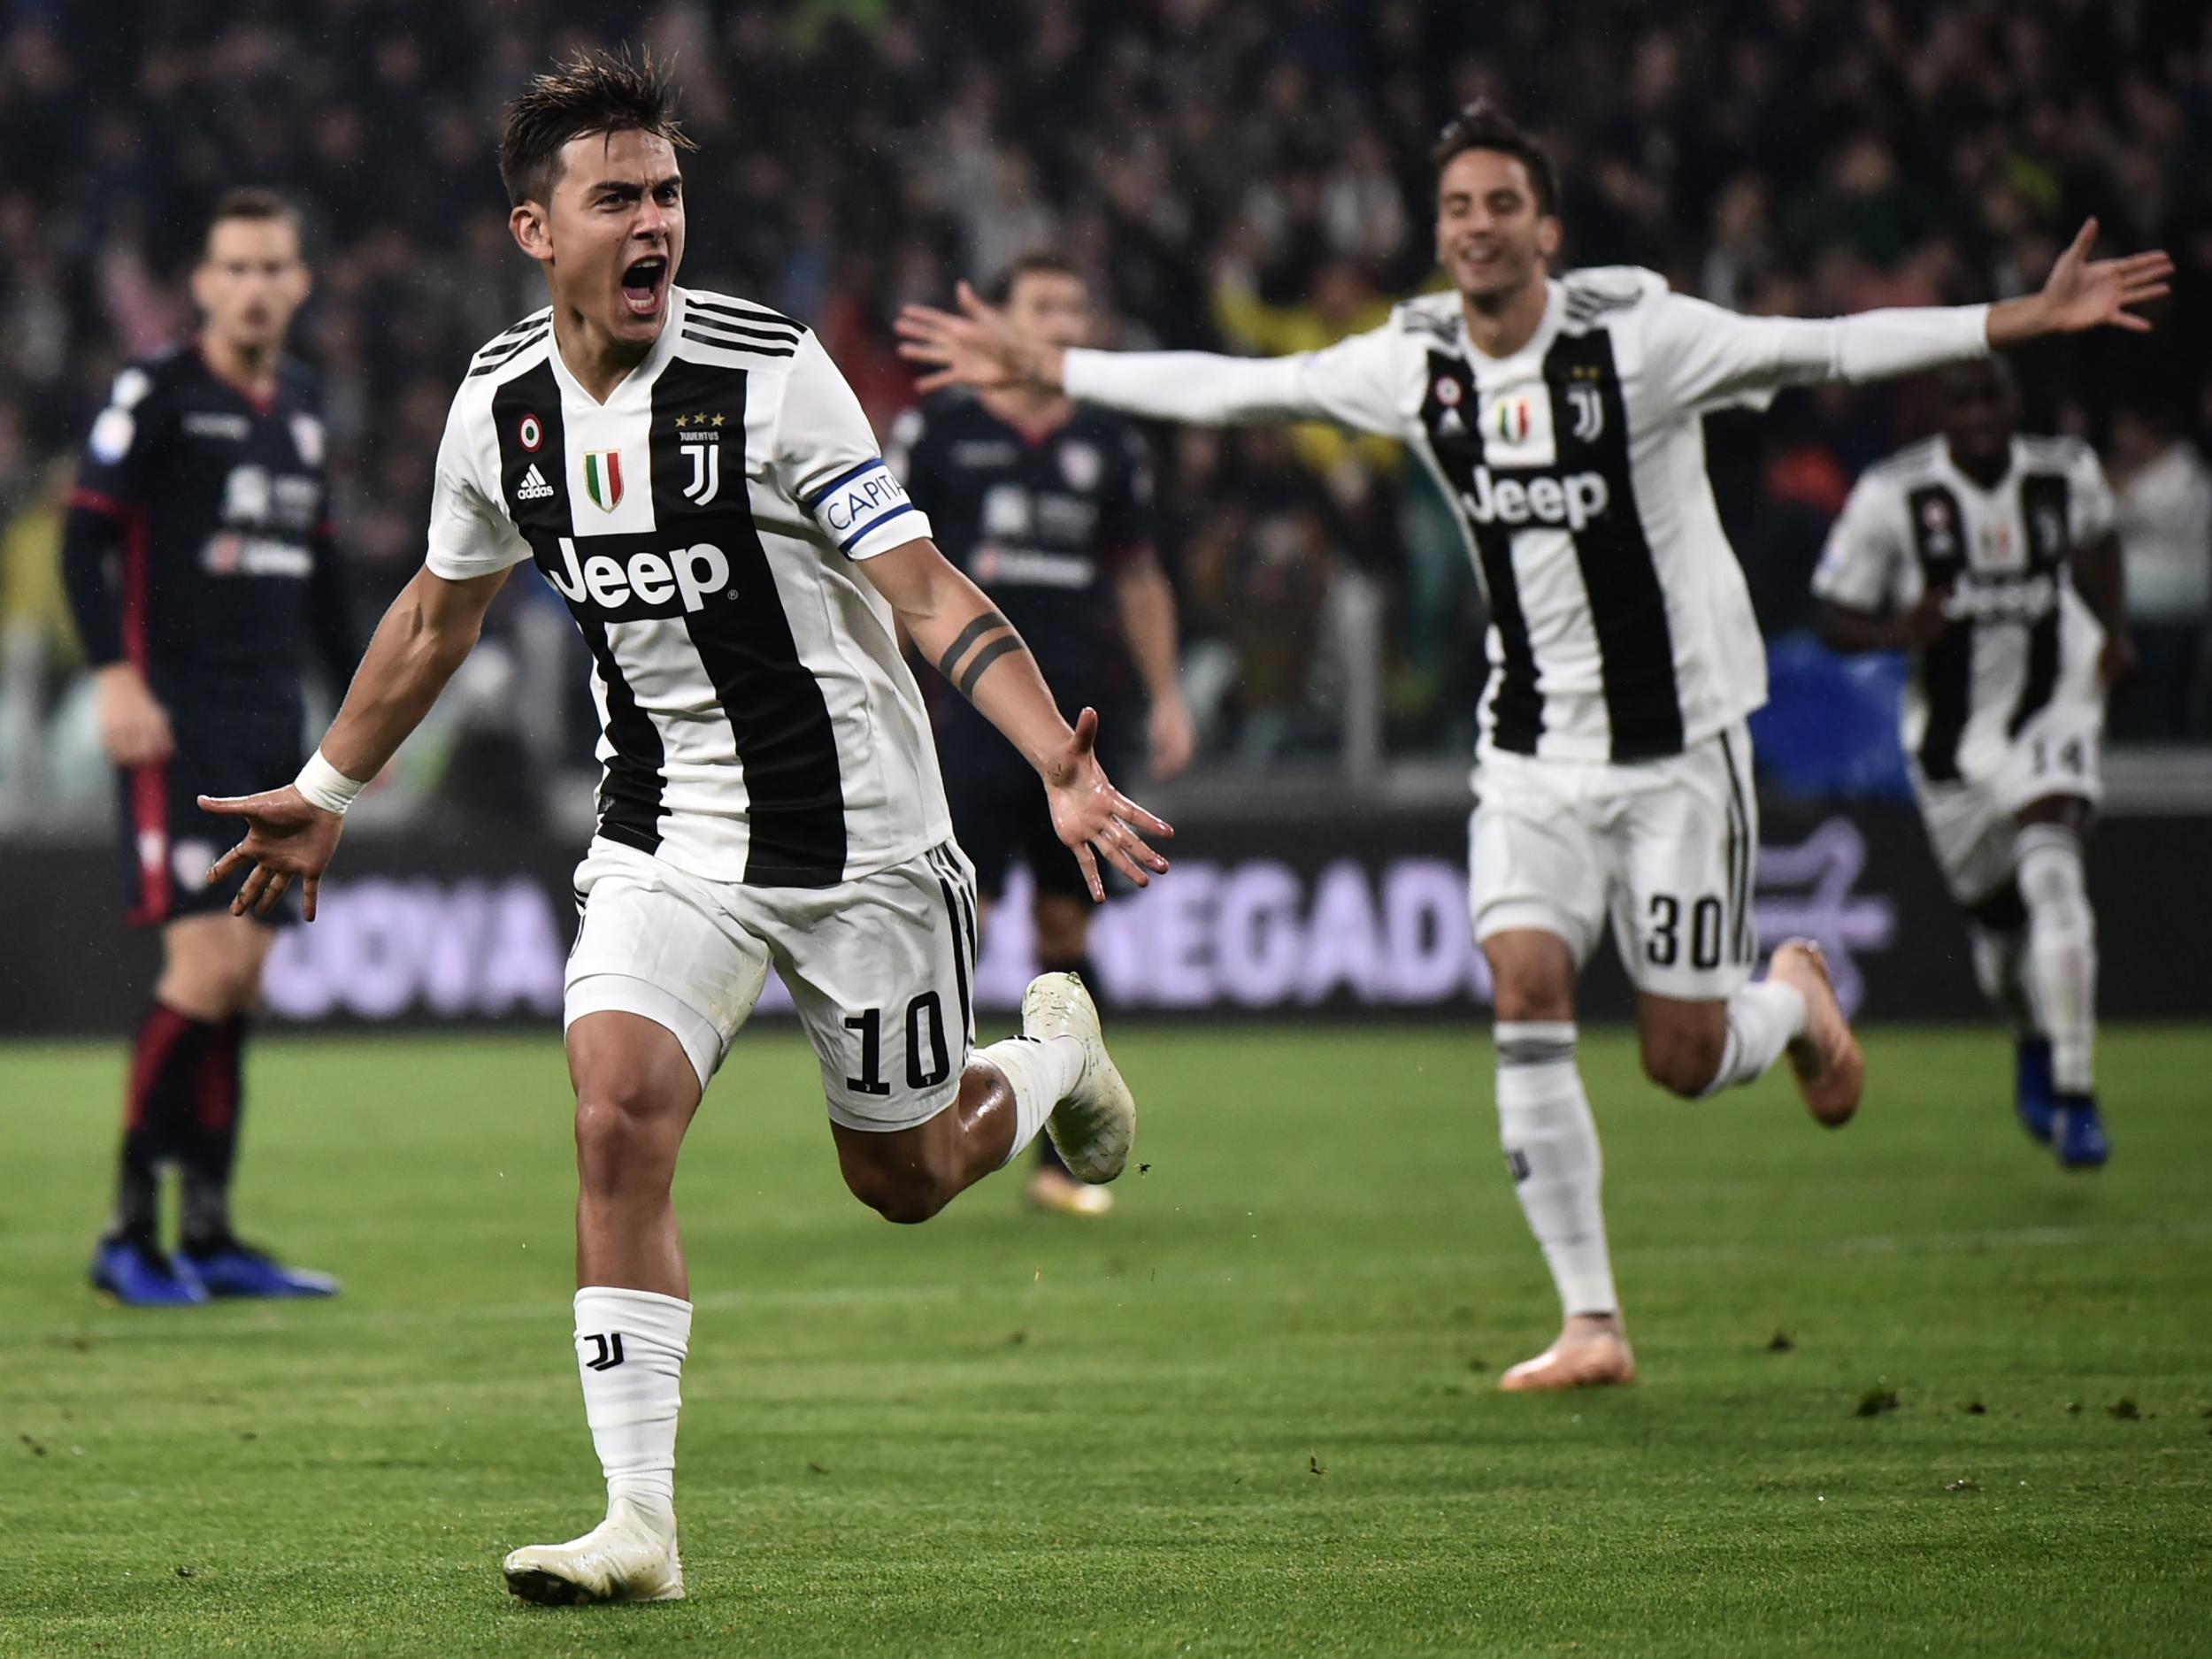 Paolo Dybala scored one of the fastest goals in Serie A history